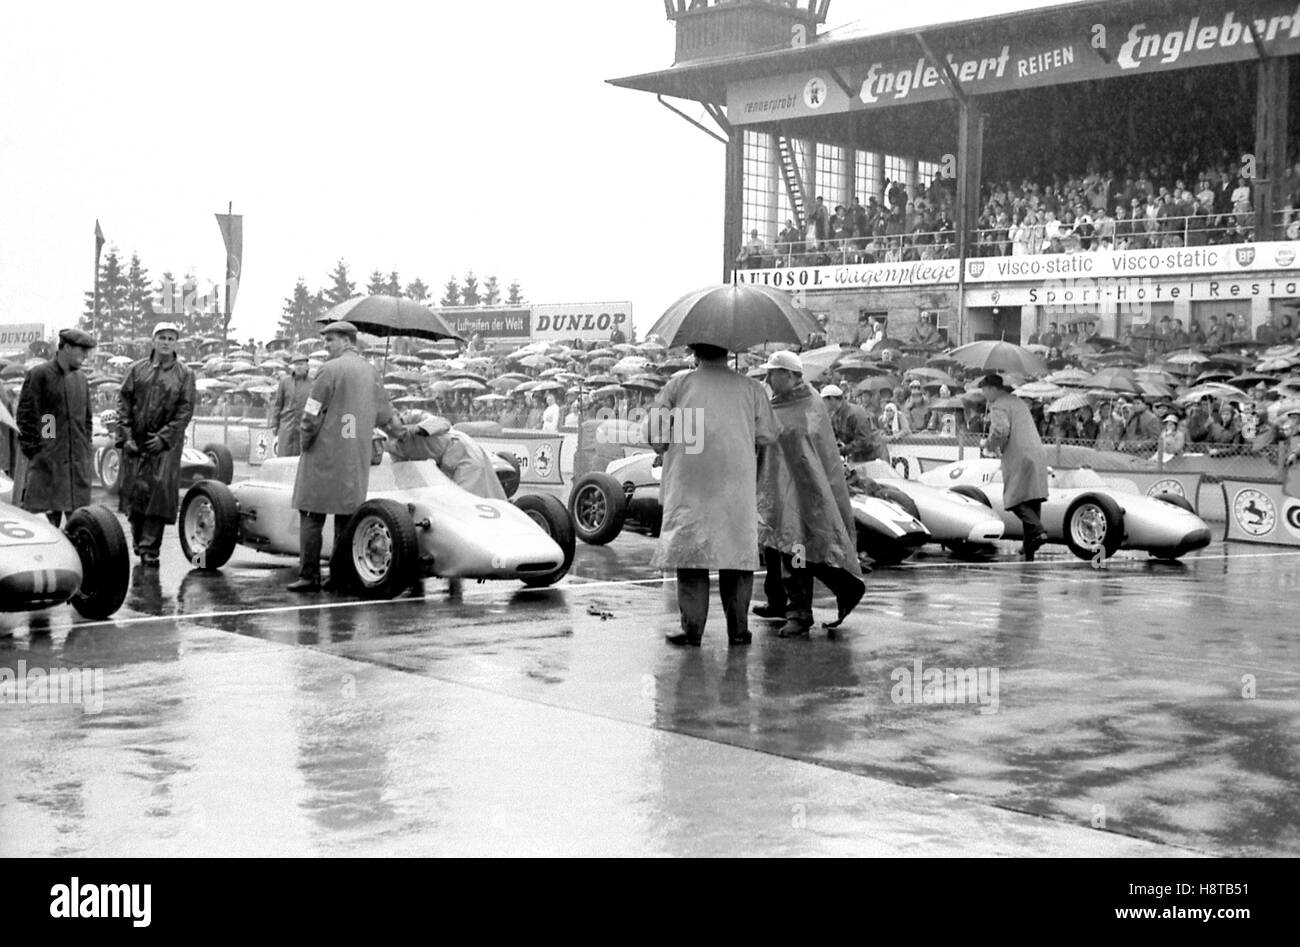 1960 GERMAN GP GRID FORMS UP Stock Photo